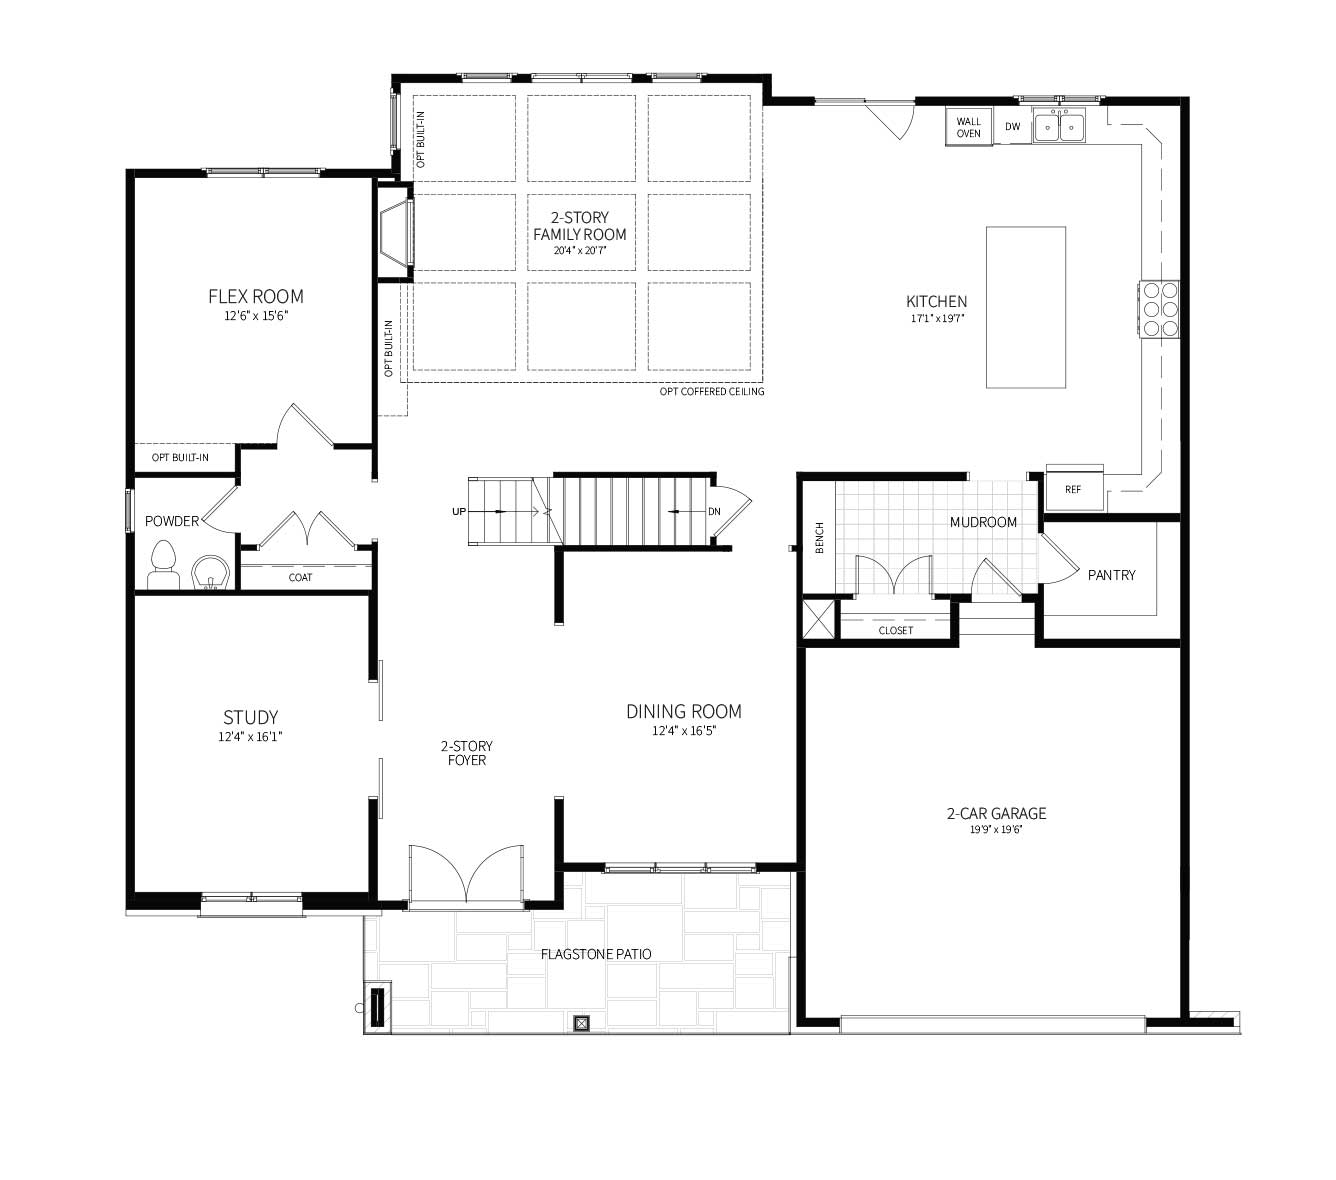 A first floor plan for the home proposed for 10827 Rock Run Dr a Hampden with expanded Kitchen.